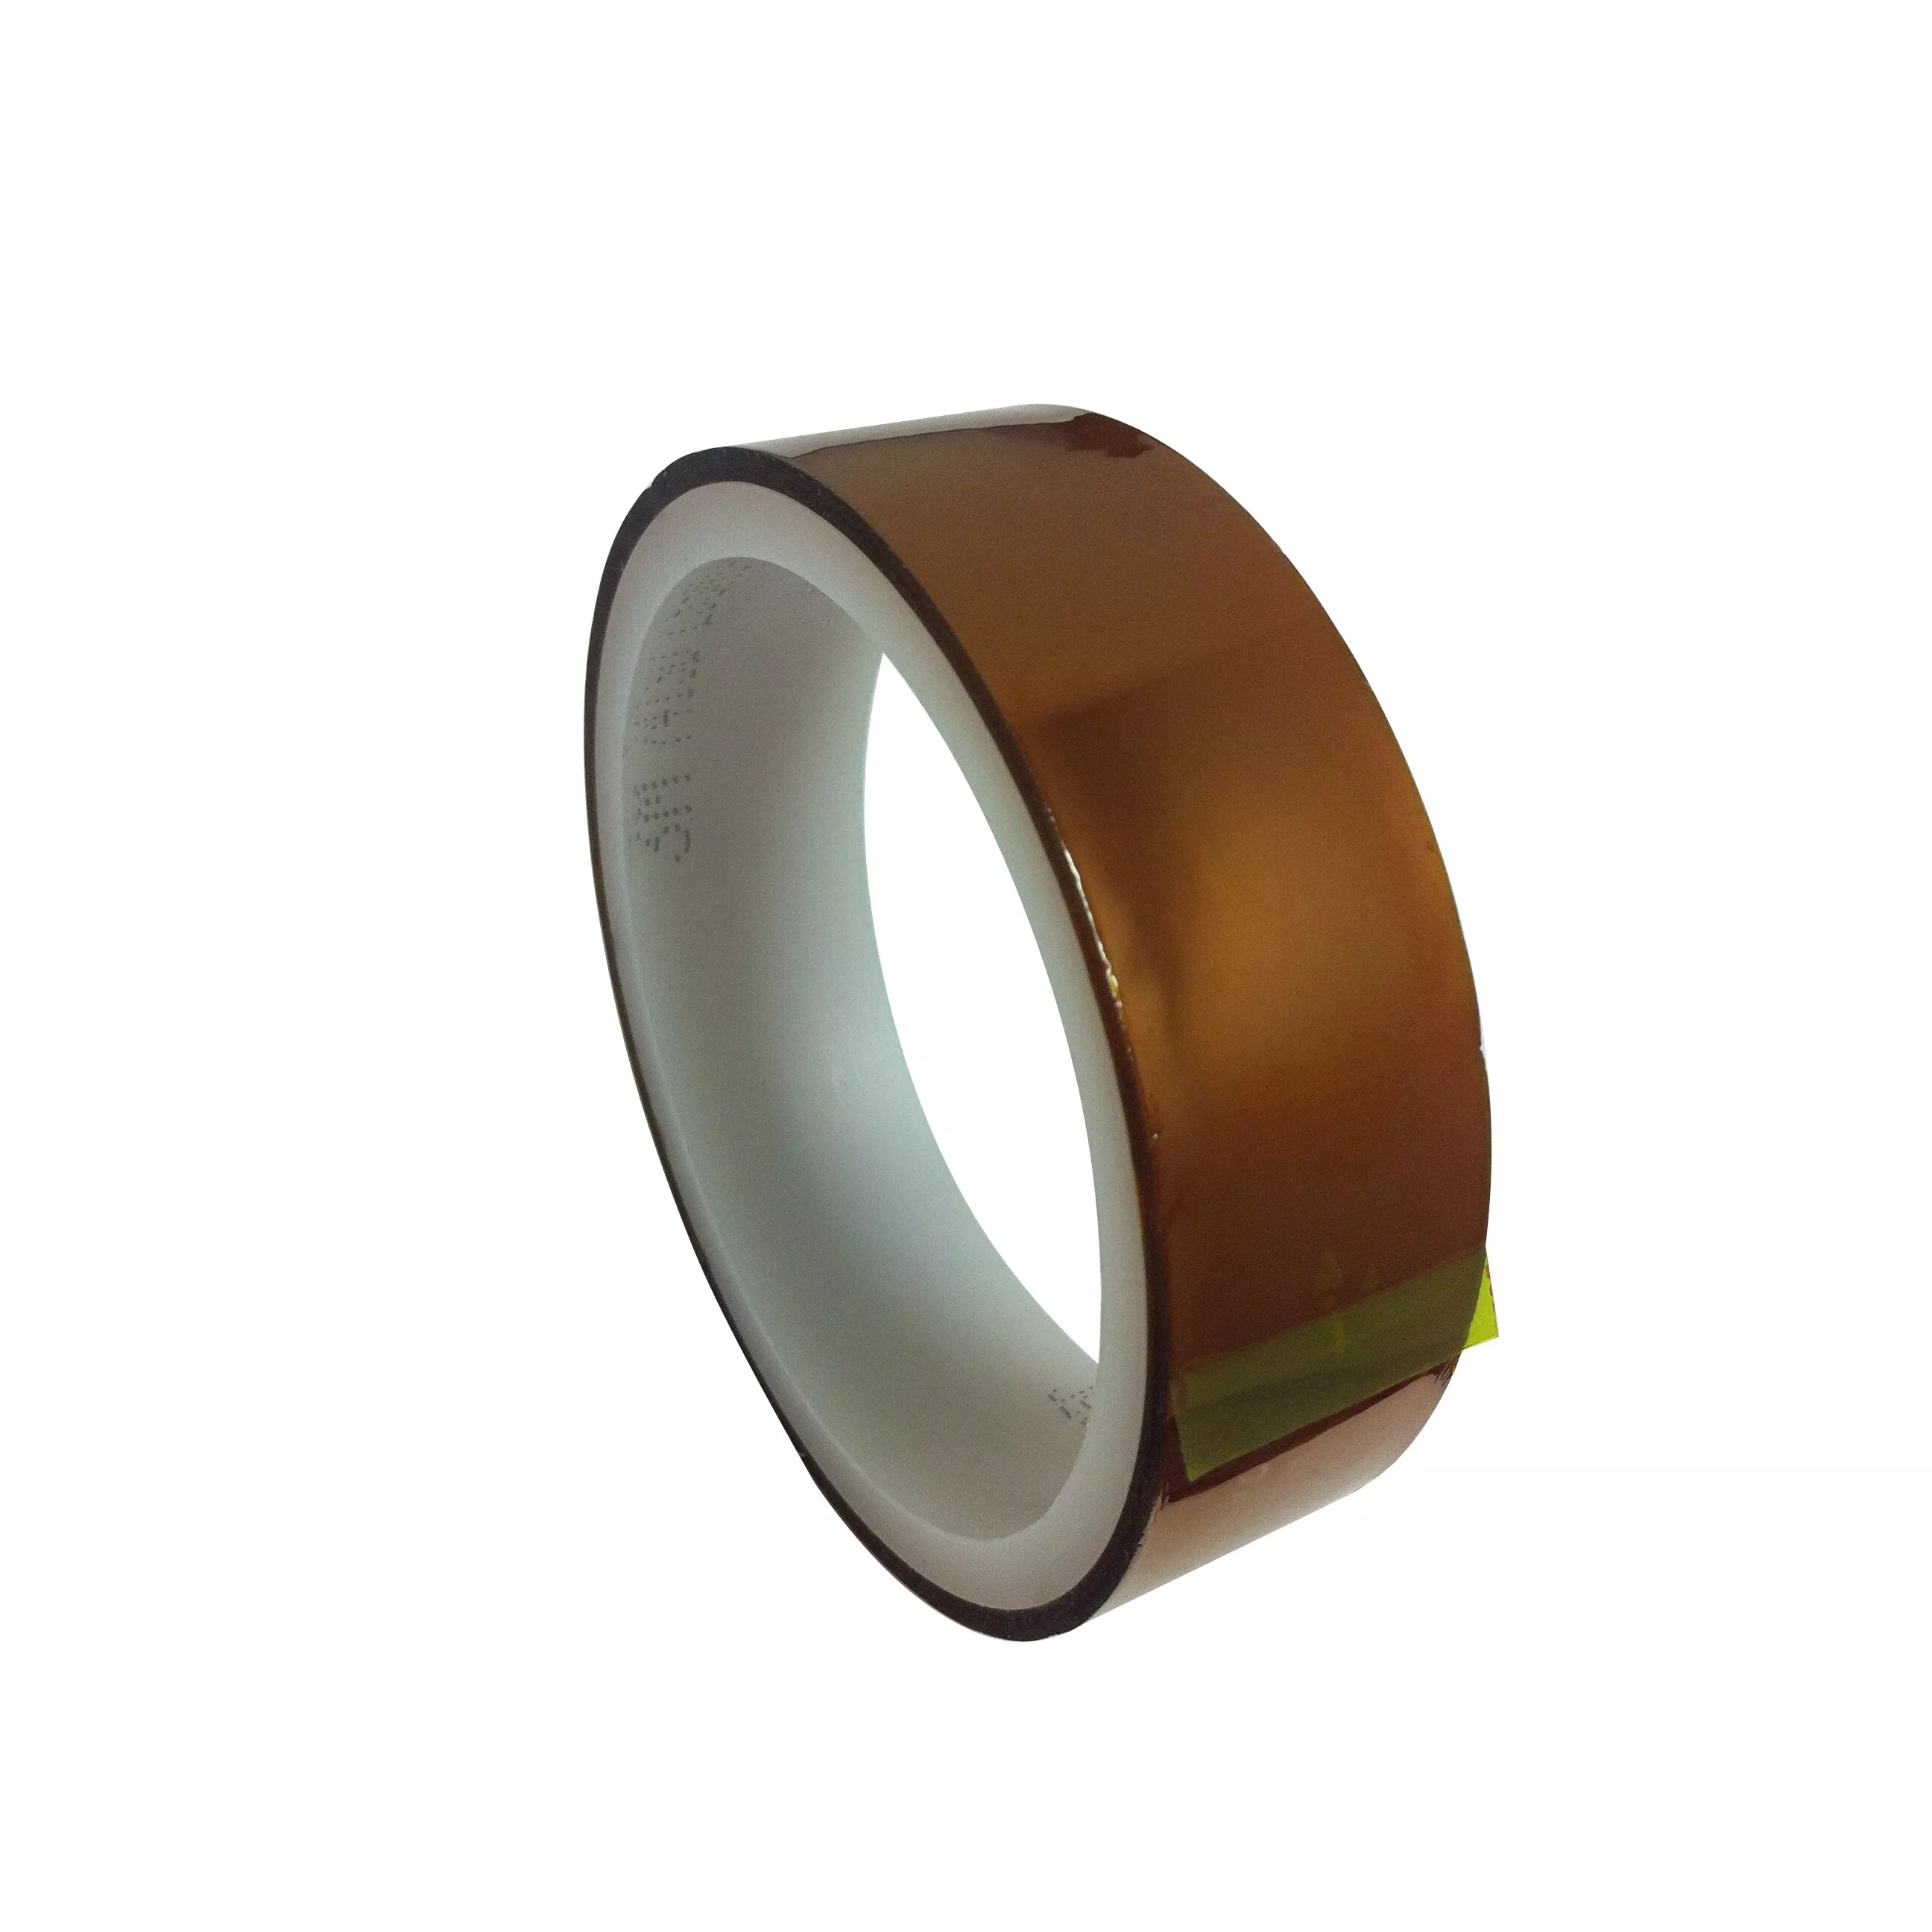 3M™ Low-Static Polyimide Film Tape 7419, 610 mm x 33 m, 1 Roll/Case